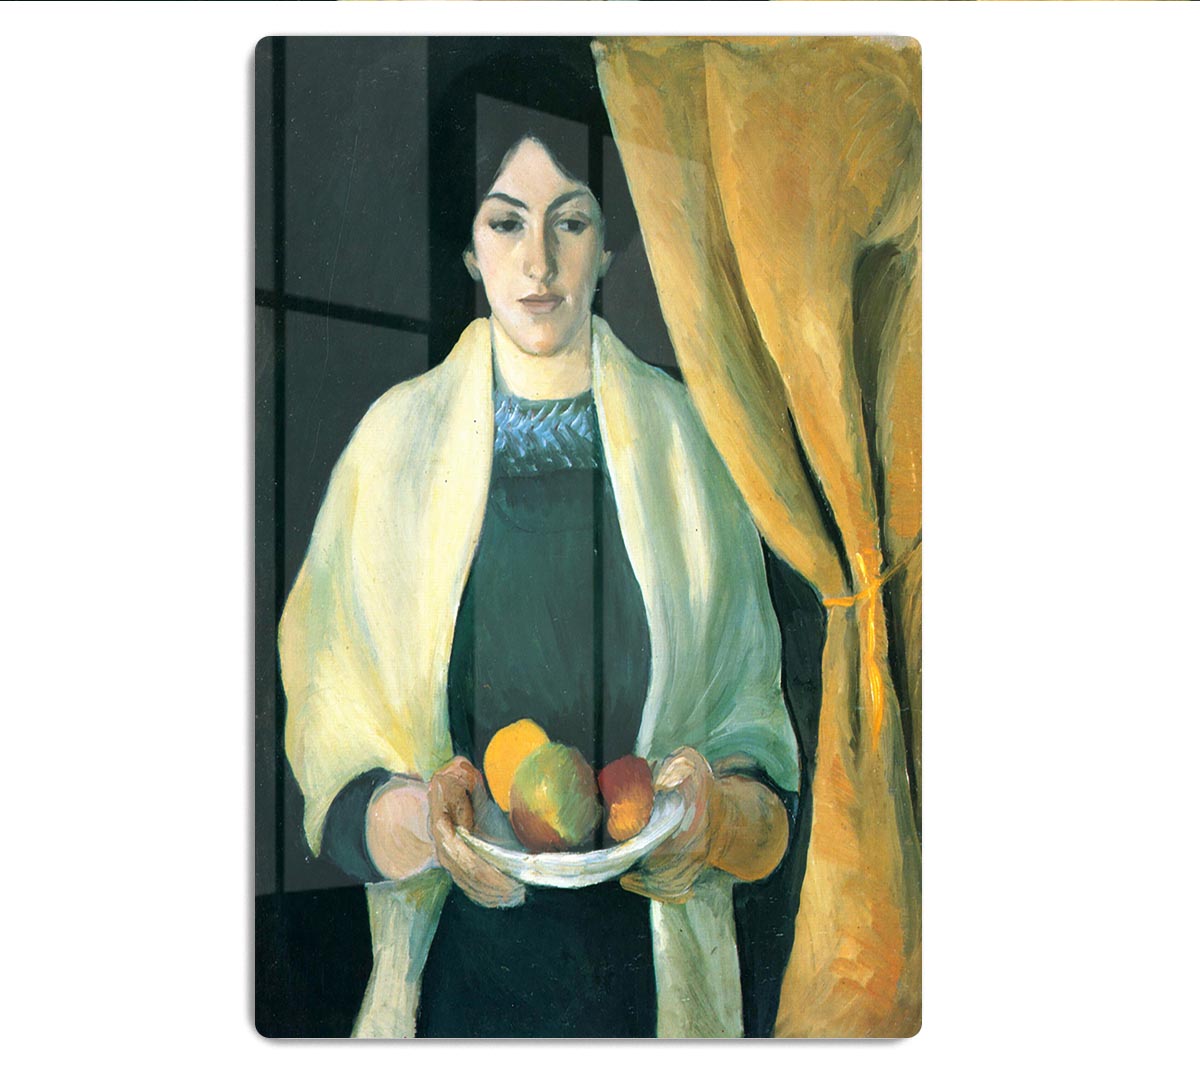 Portrait with apples portrait of the wife of the artist by Macke Acrylic Block - Canvas Art Rocks - 1